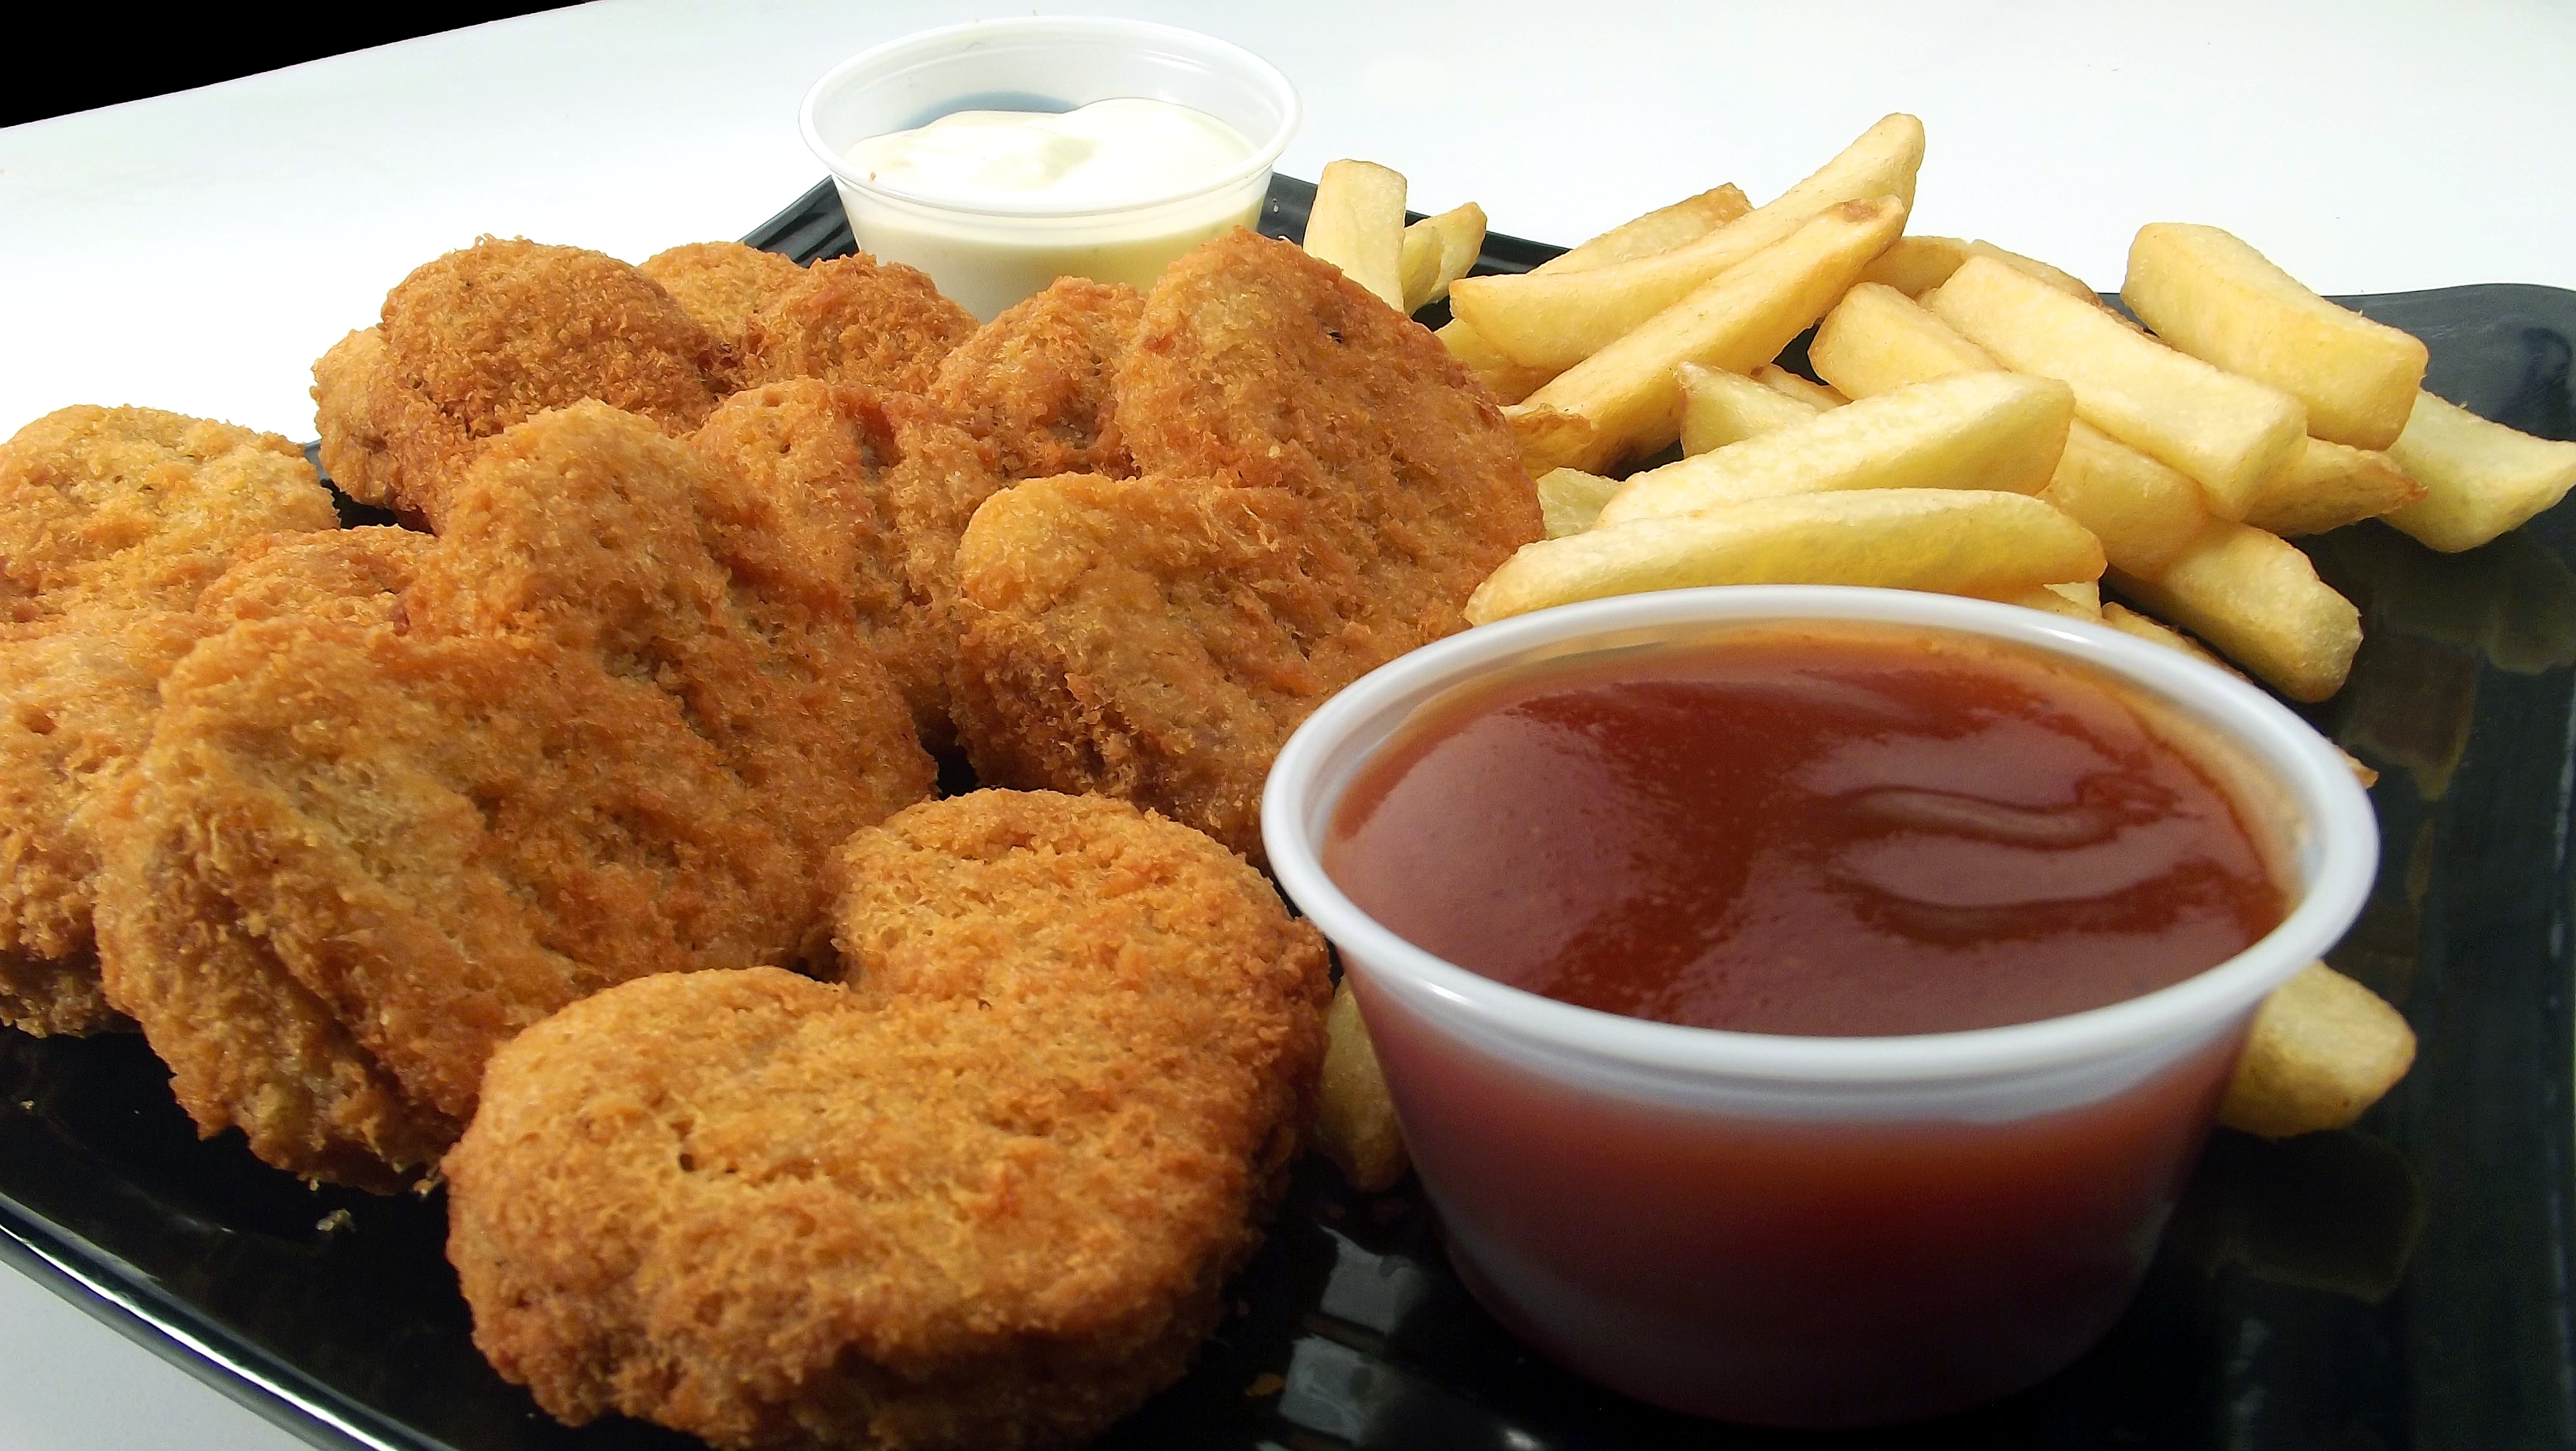 Nuggets, Keychup, And Fries Dish - Chicken Nuggets , HD Wallpaper & Backgrounds